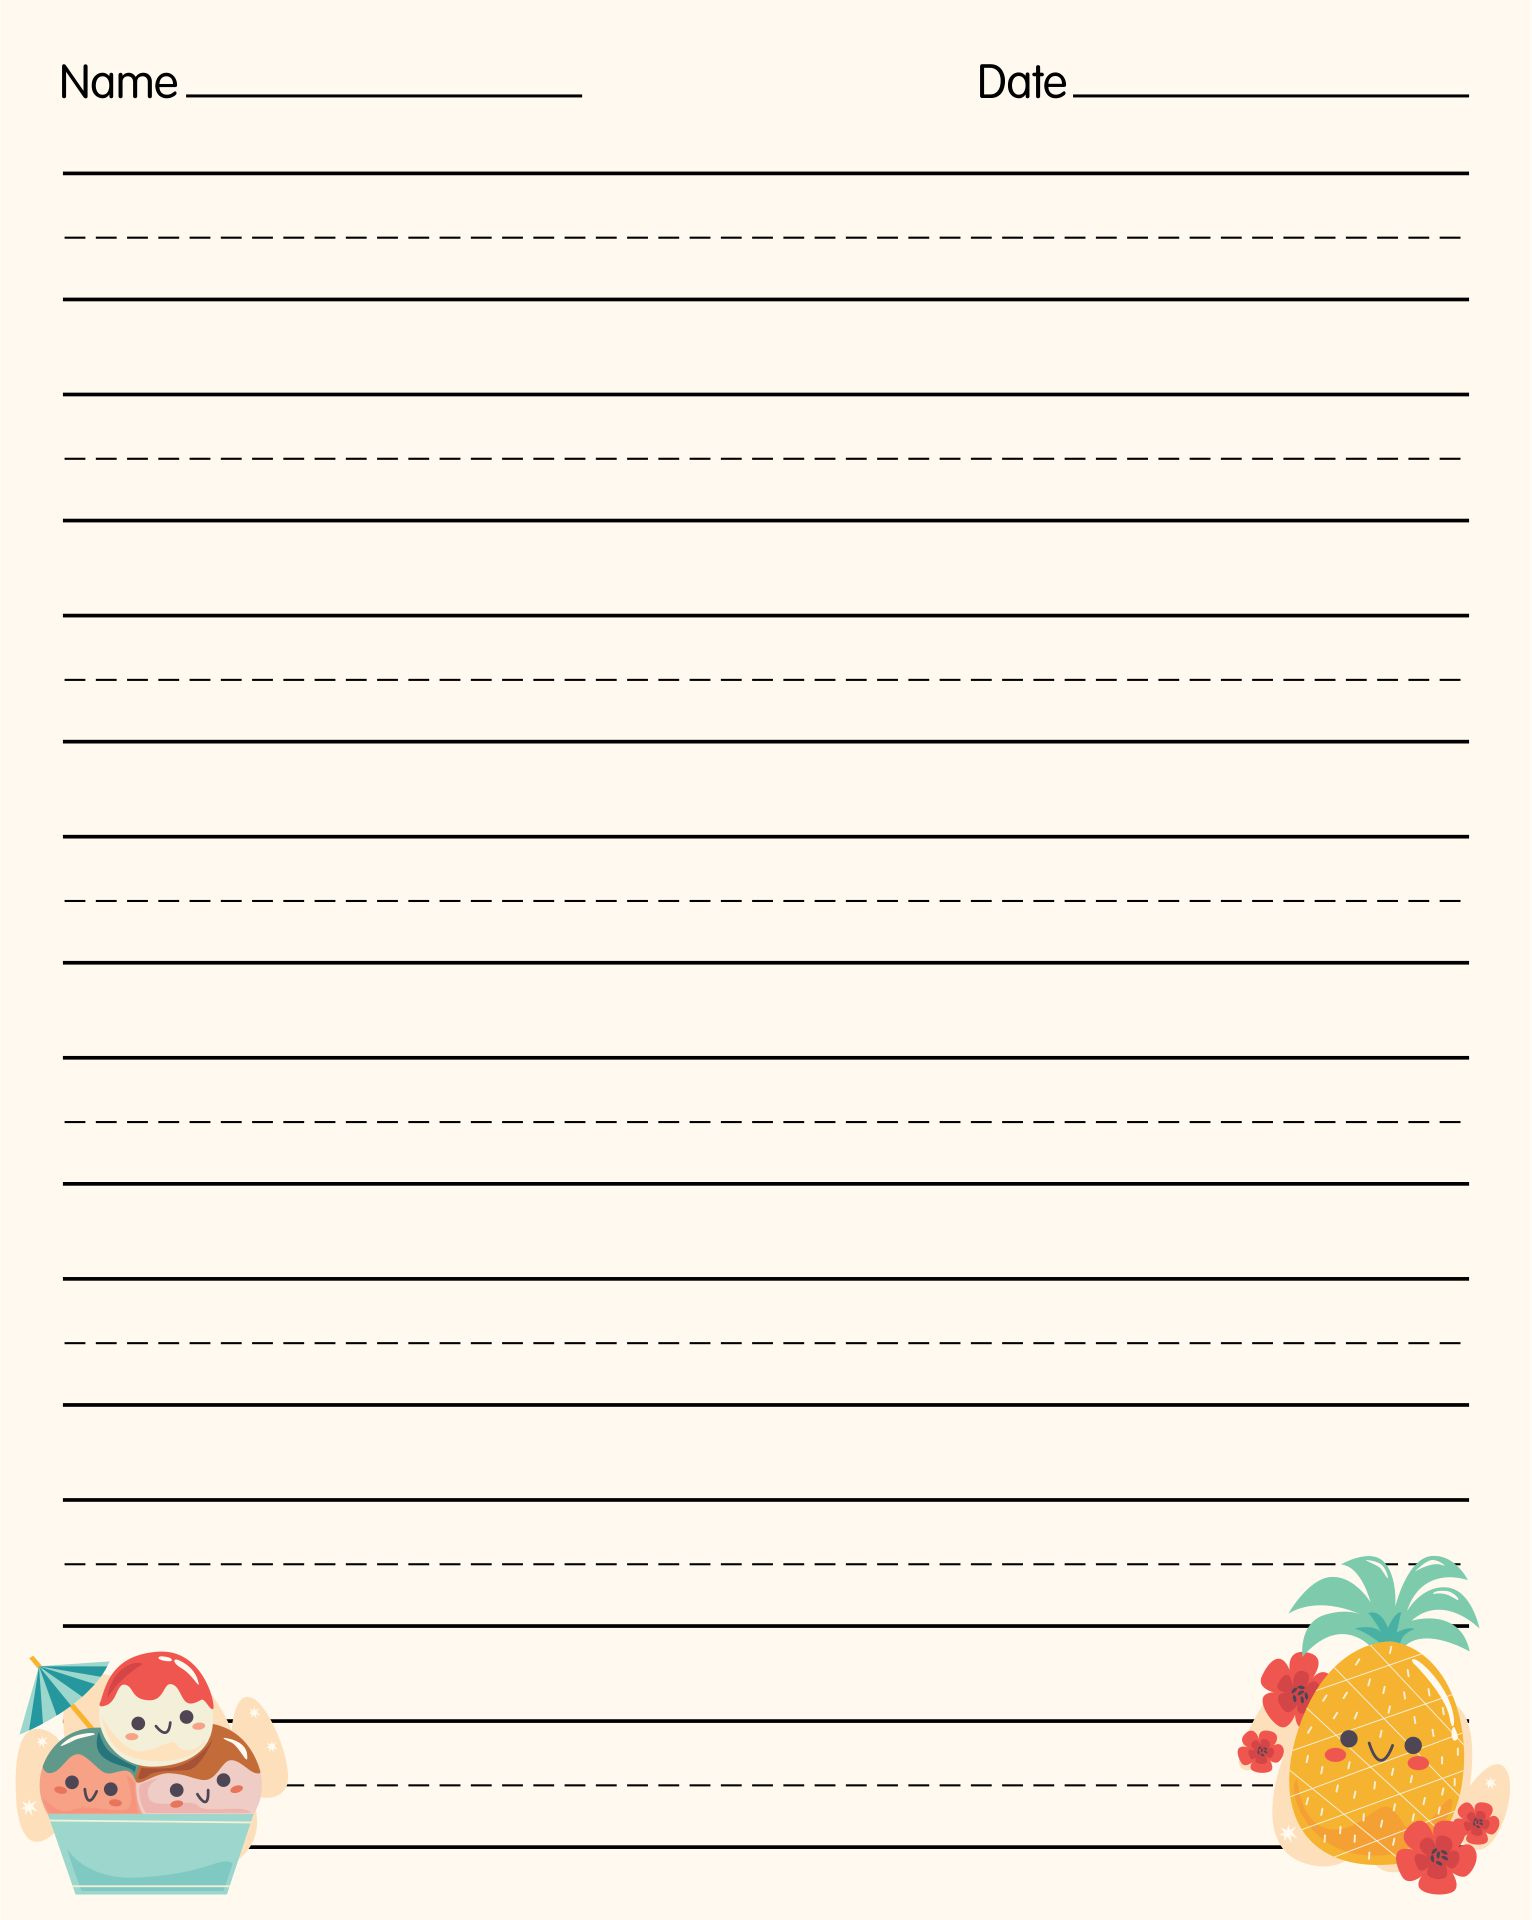 Free Printable Lined Paper For Letter Writing A Line Divided Into 3 